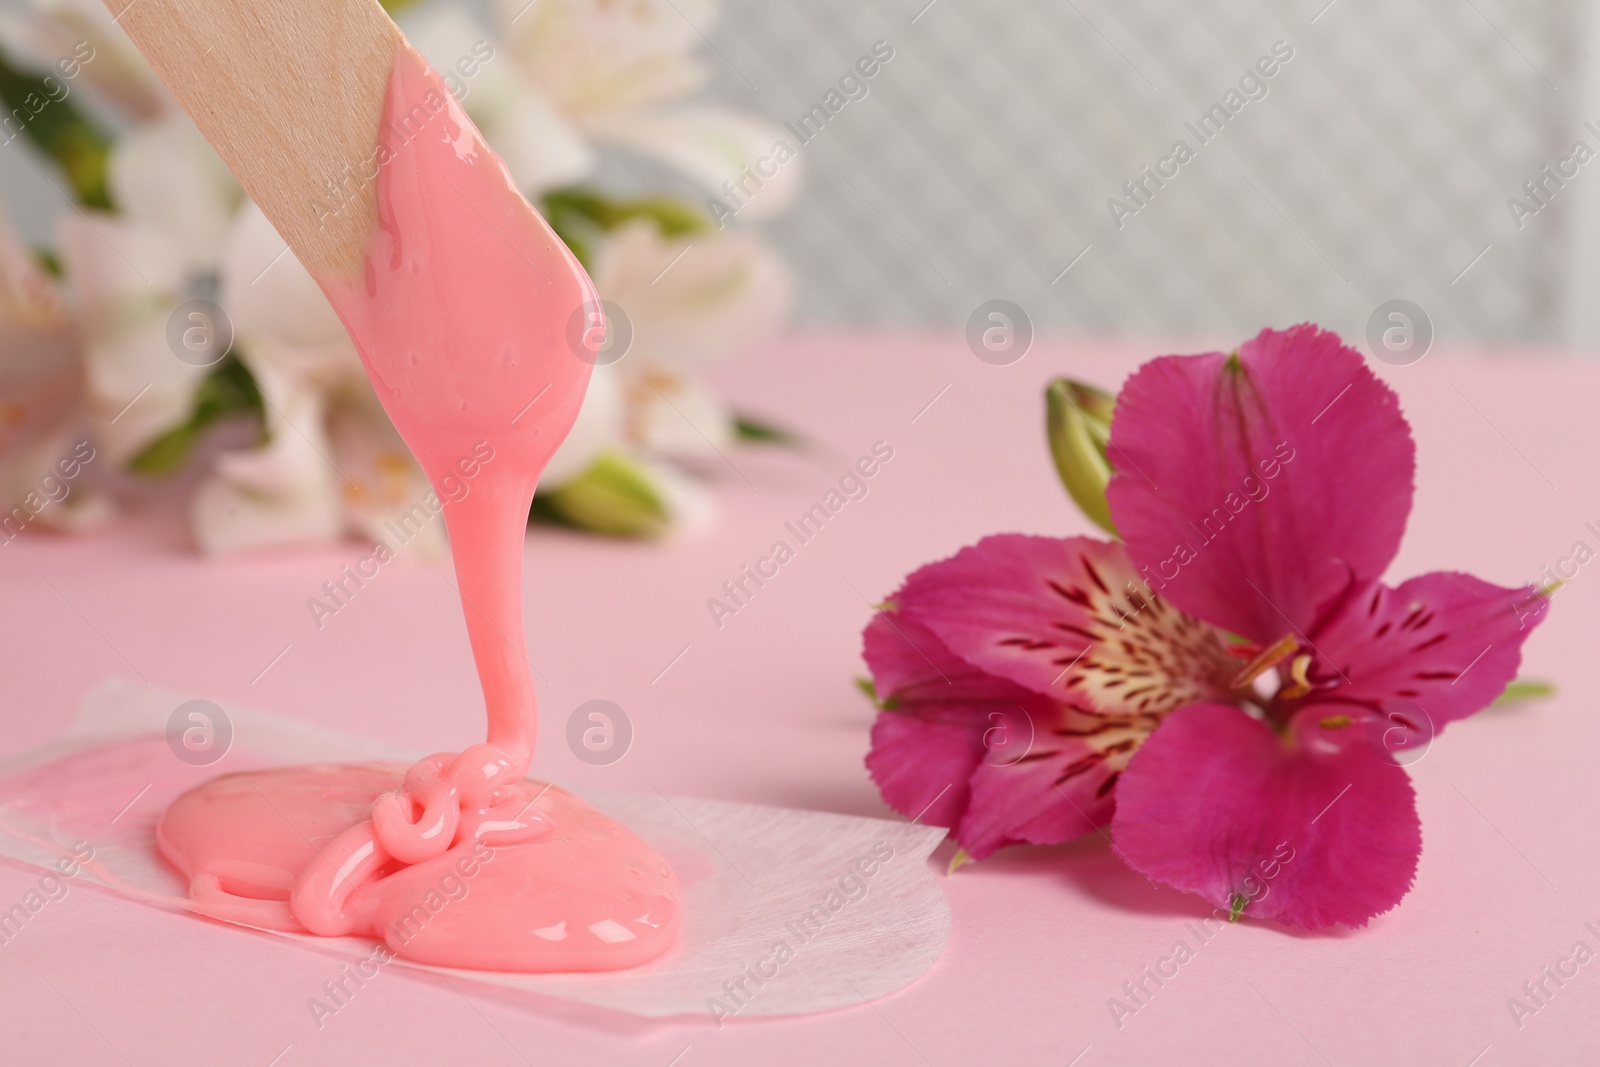 Photo of Wooden spatula with hot depilatory wax and flower on light pink table, closeup